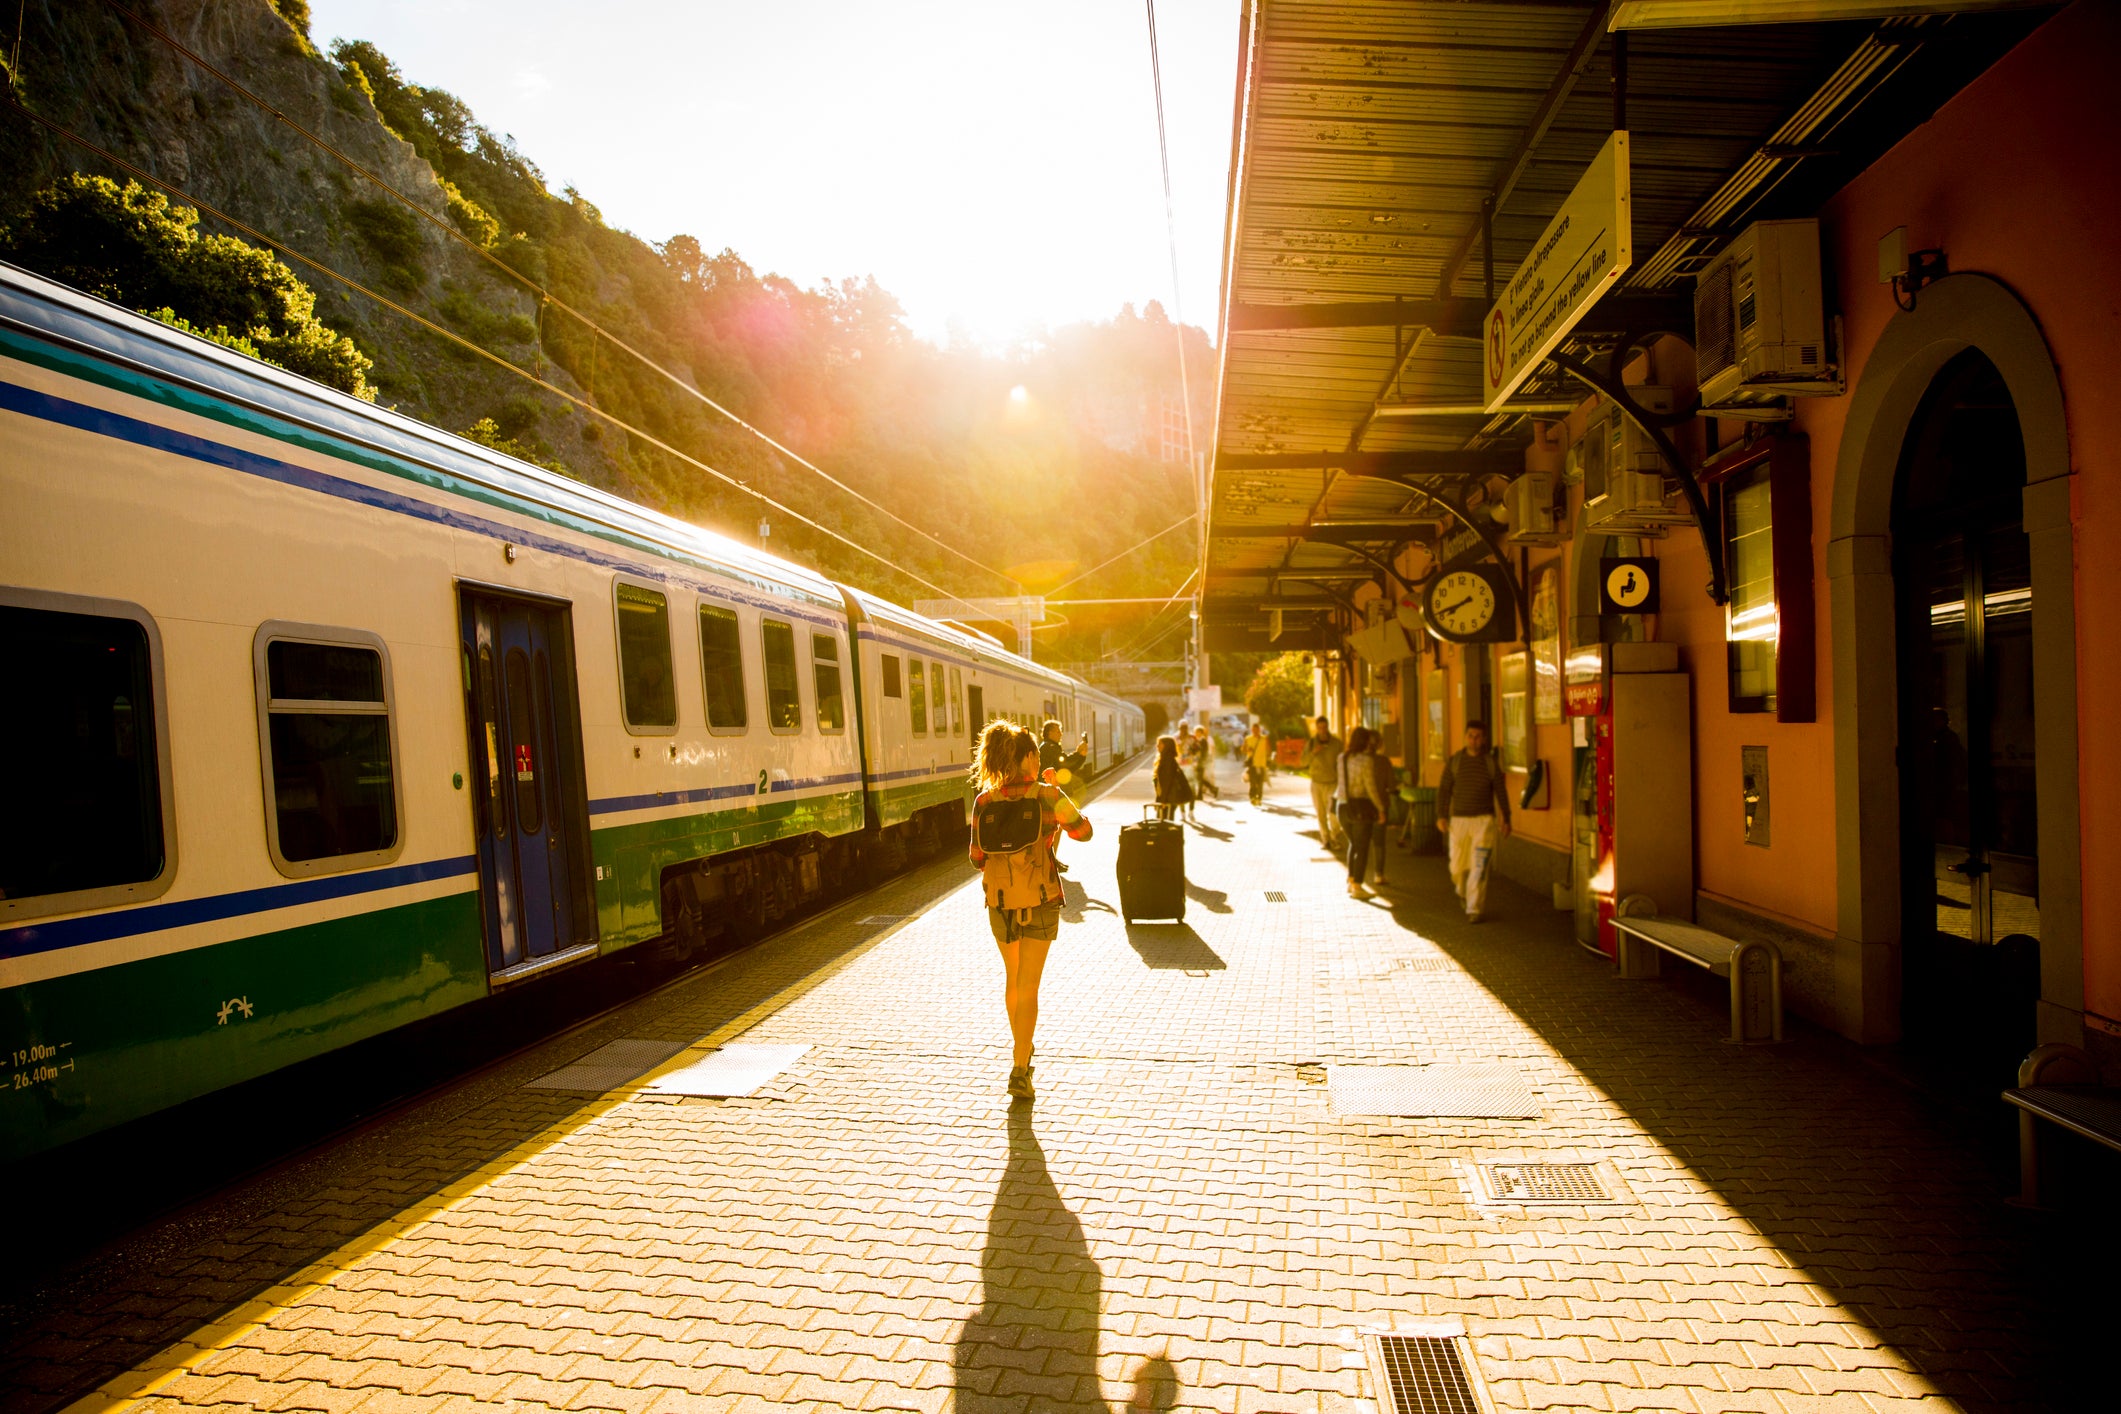 cheapest way to travel europe by train